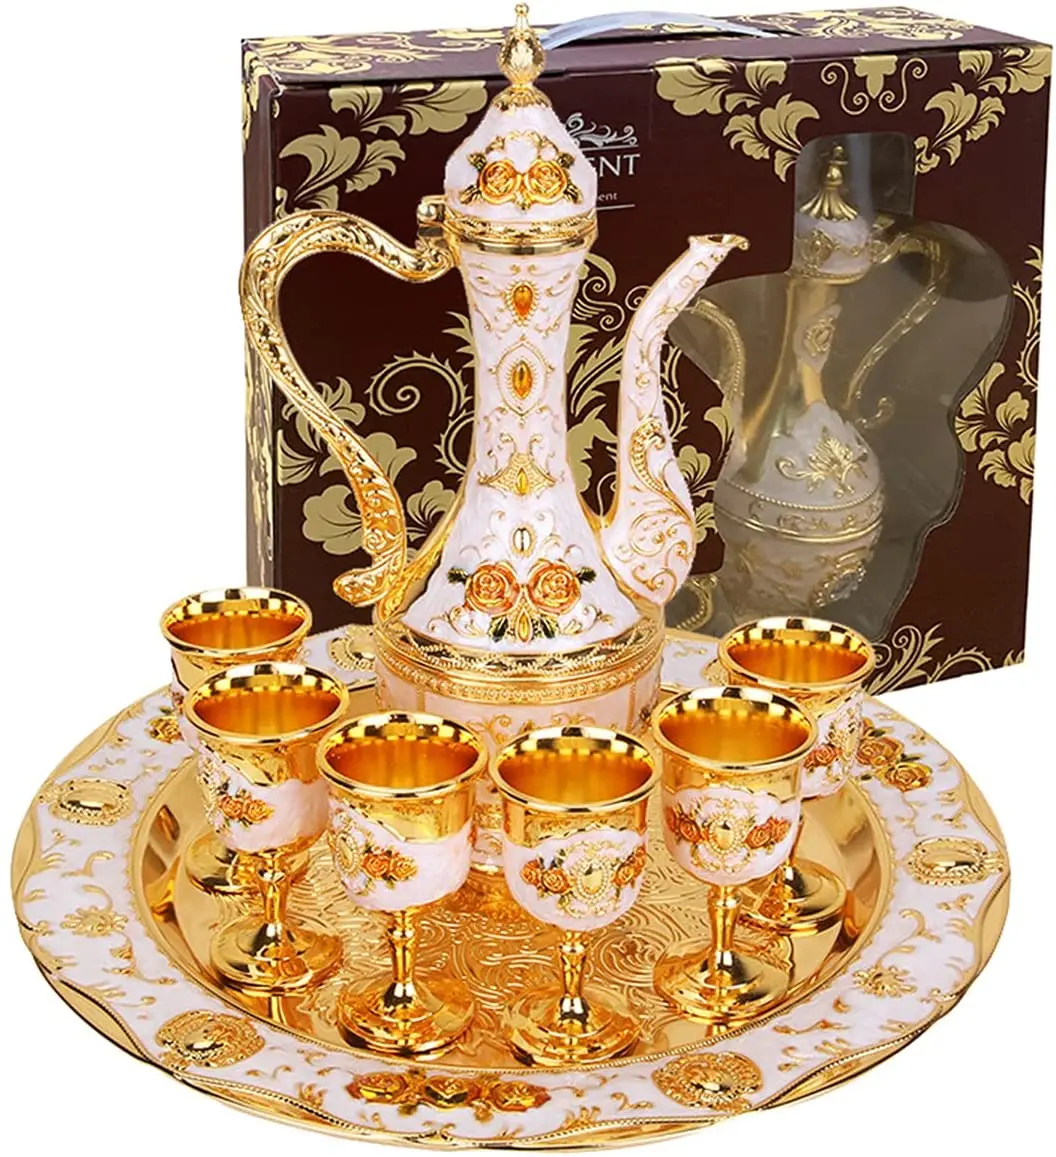 

QIAN HU Vintage Turkish Tea Set with 6 Luxury Coffee Cups & Craft Tea Tray Teapot for Wedding Gift, Golden or silver